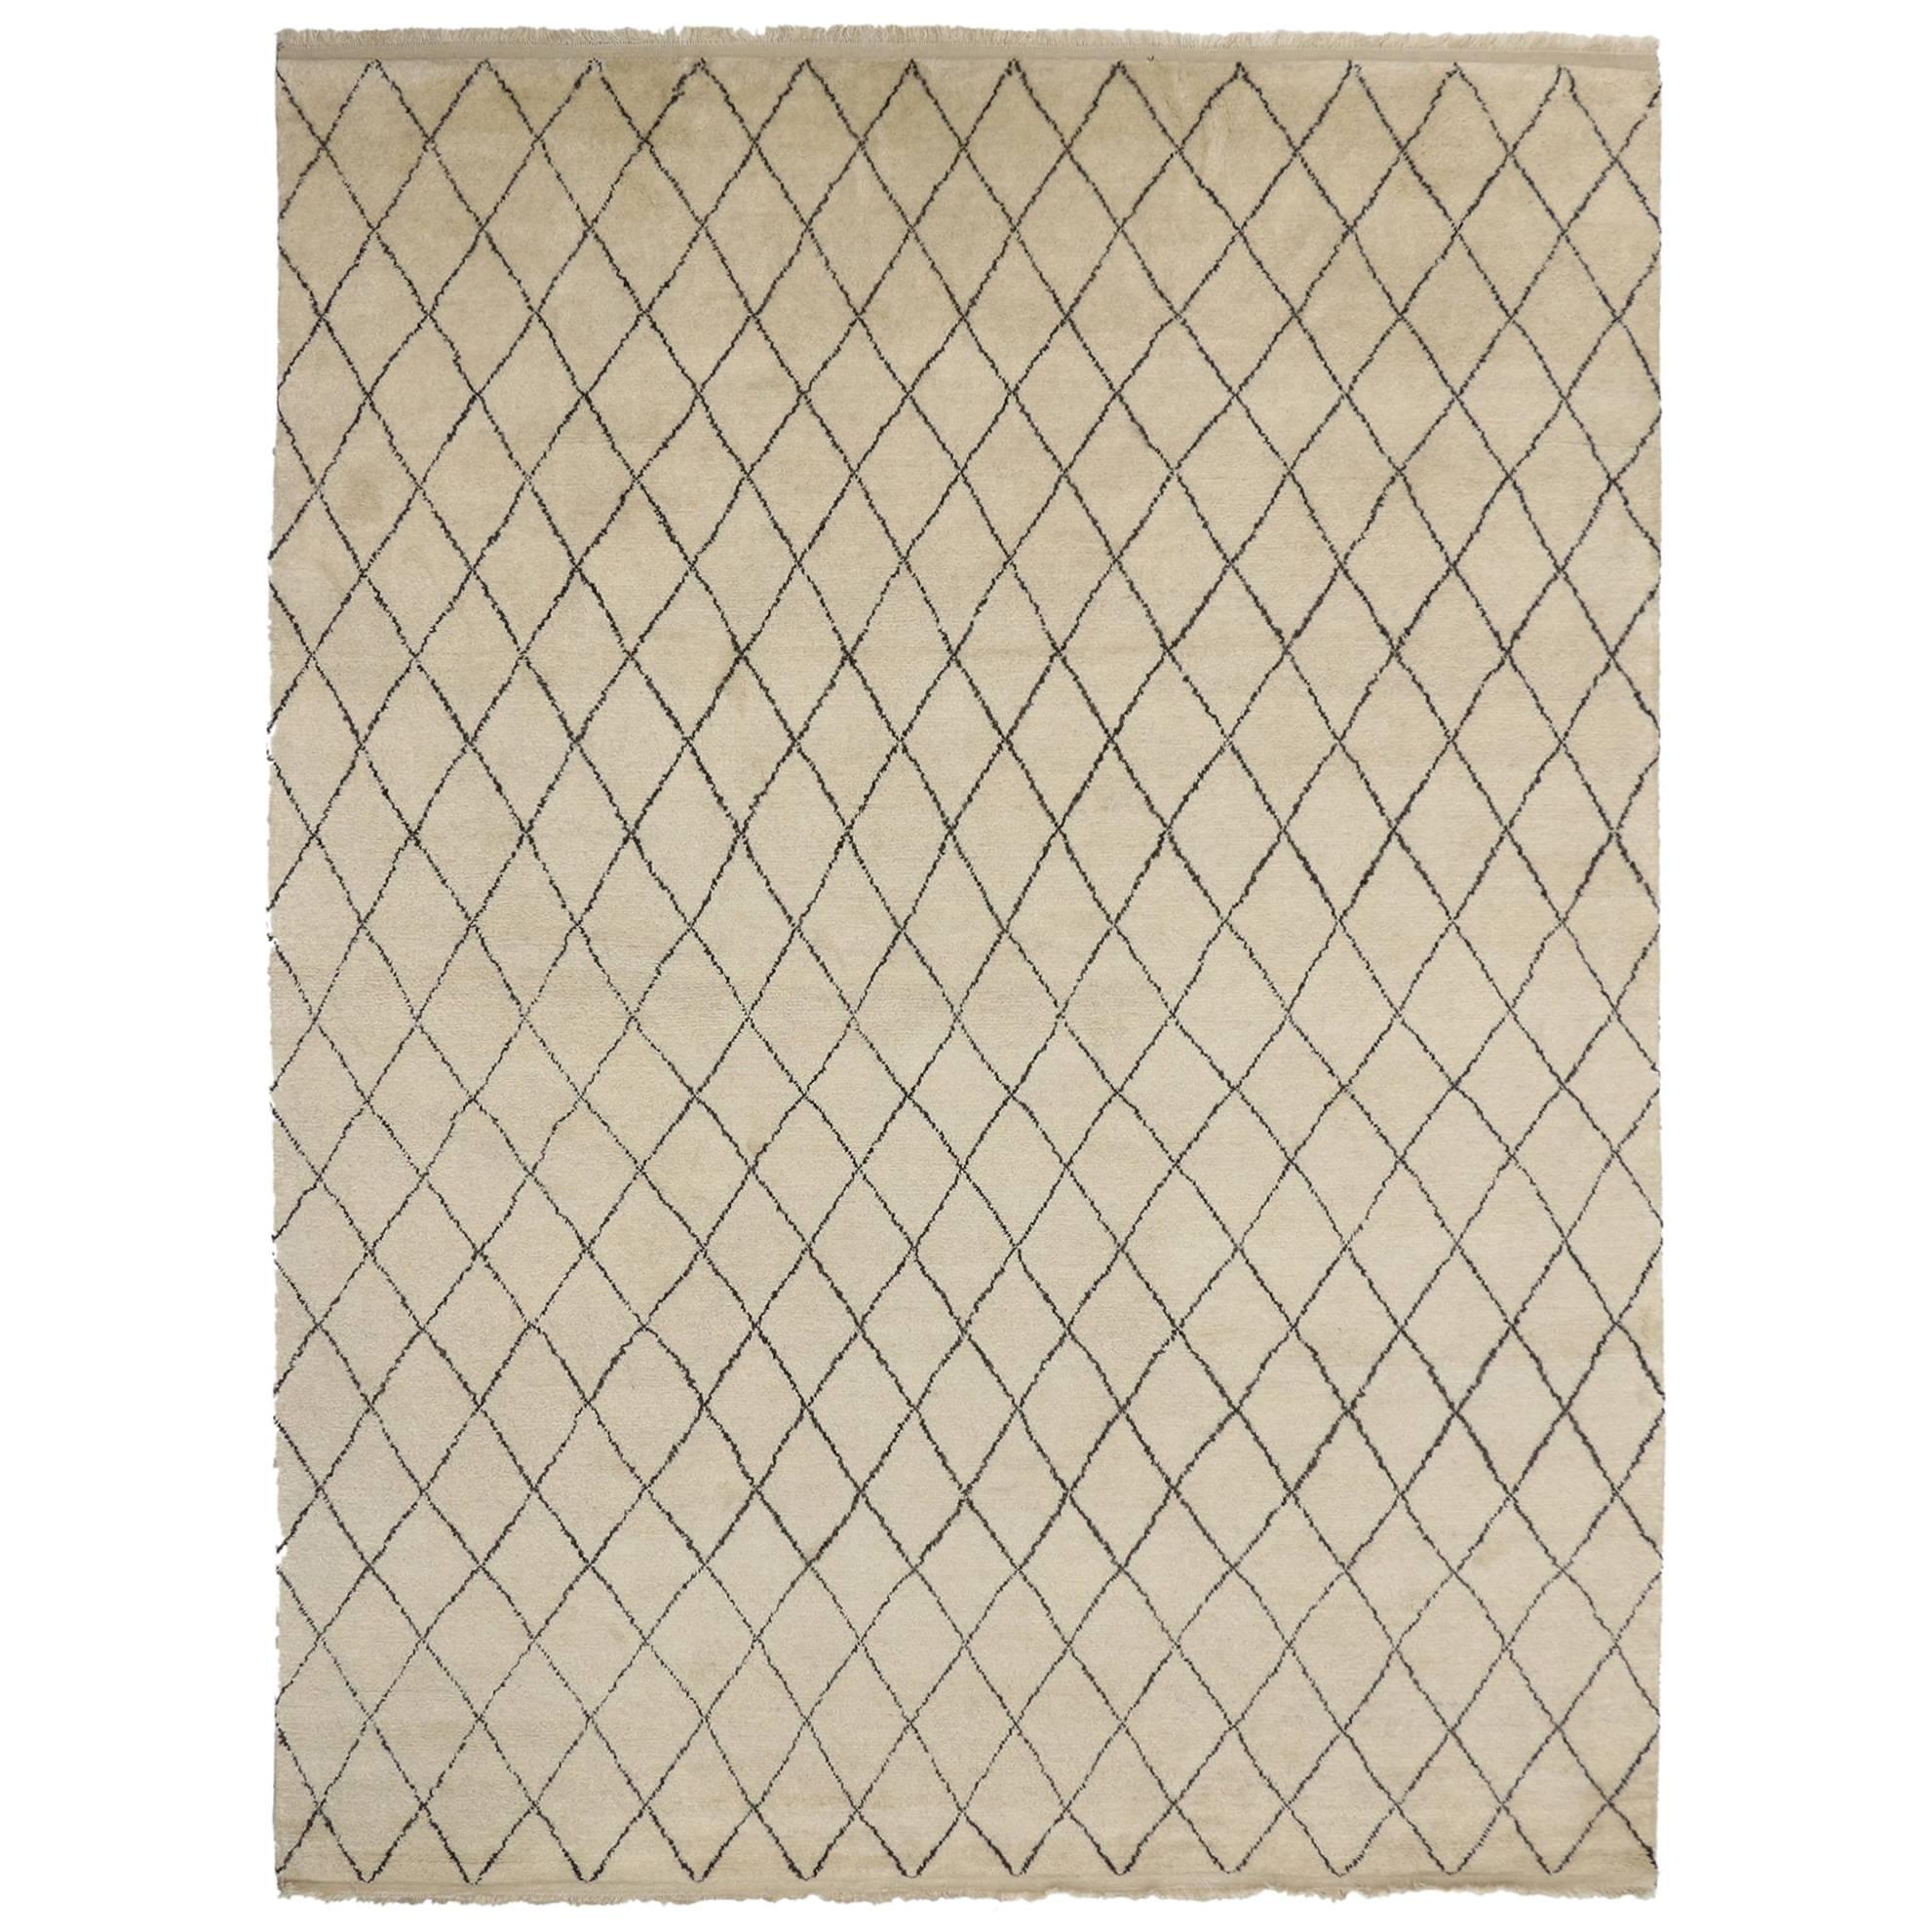 New Contemporary Moroccan Area Rug with Modern Nomadic Design